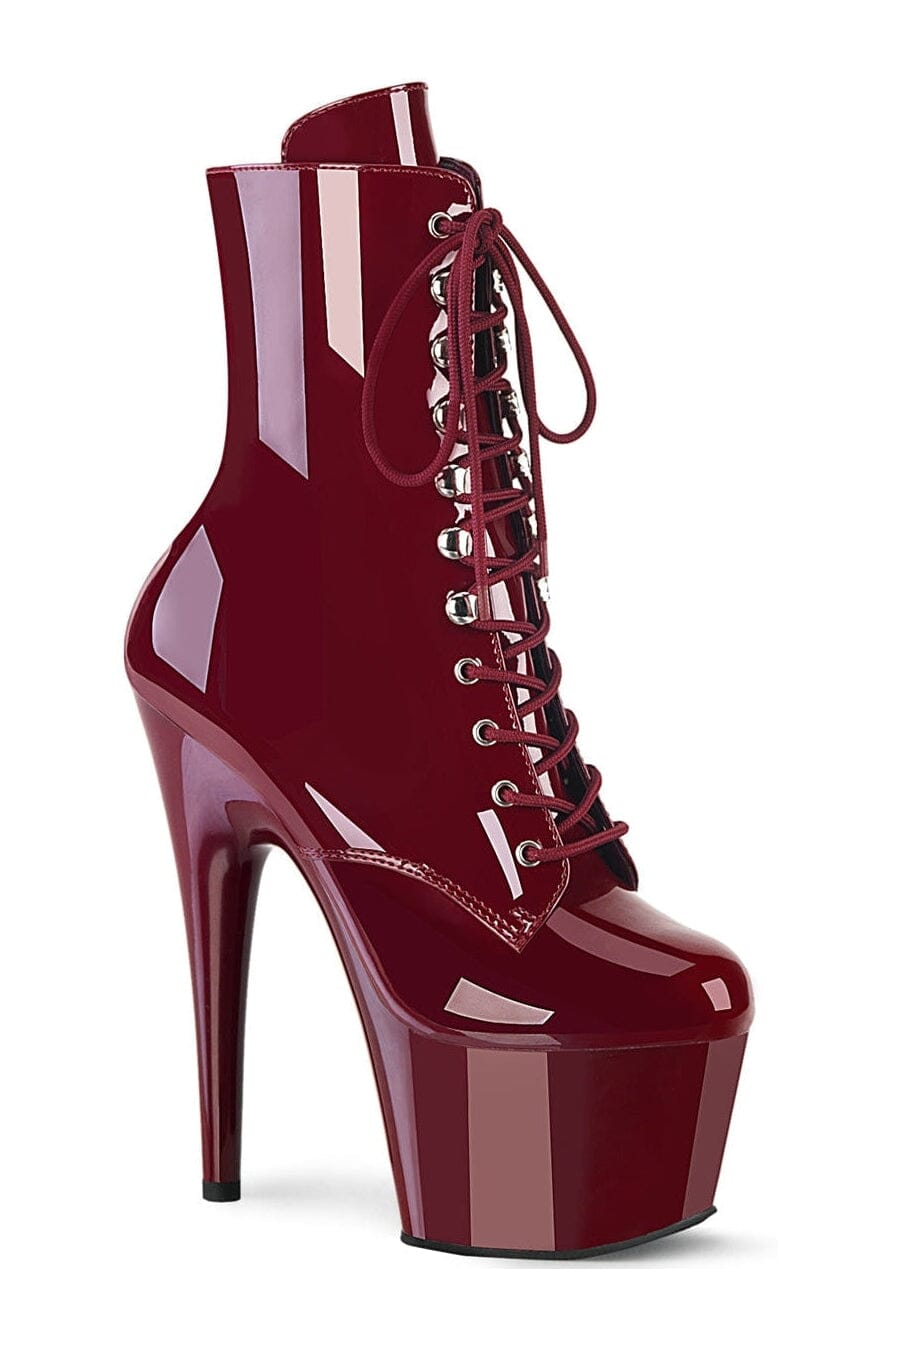 Pleaser Burgundy Ankle Boots Platform Stripper Shoes | Buy at Sexyshoes.com